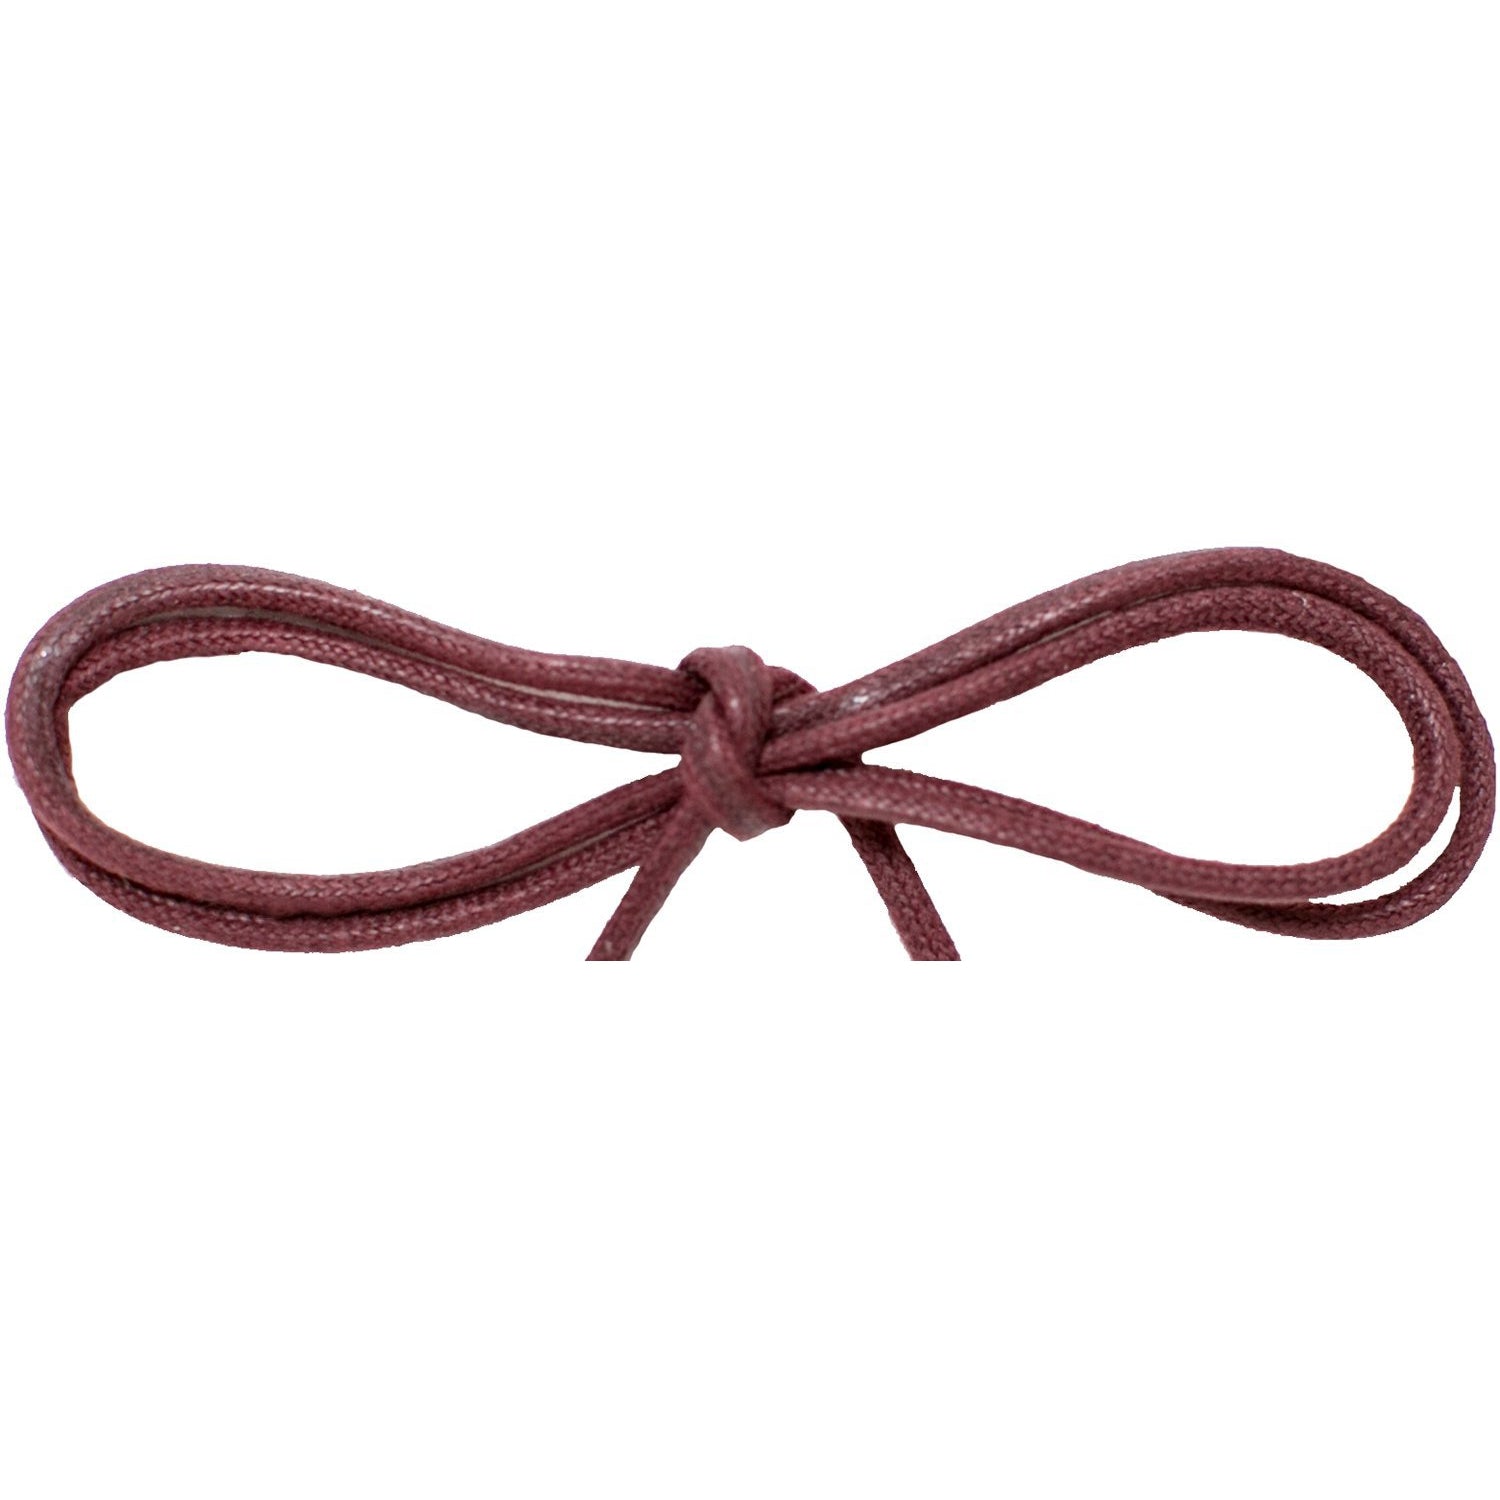 Wholesale Waxed Cotton Thin Round DRESS Laces 1/8'' - Burgundy (12 Pair Pack) Shoelaces